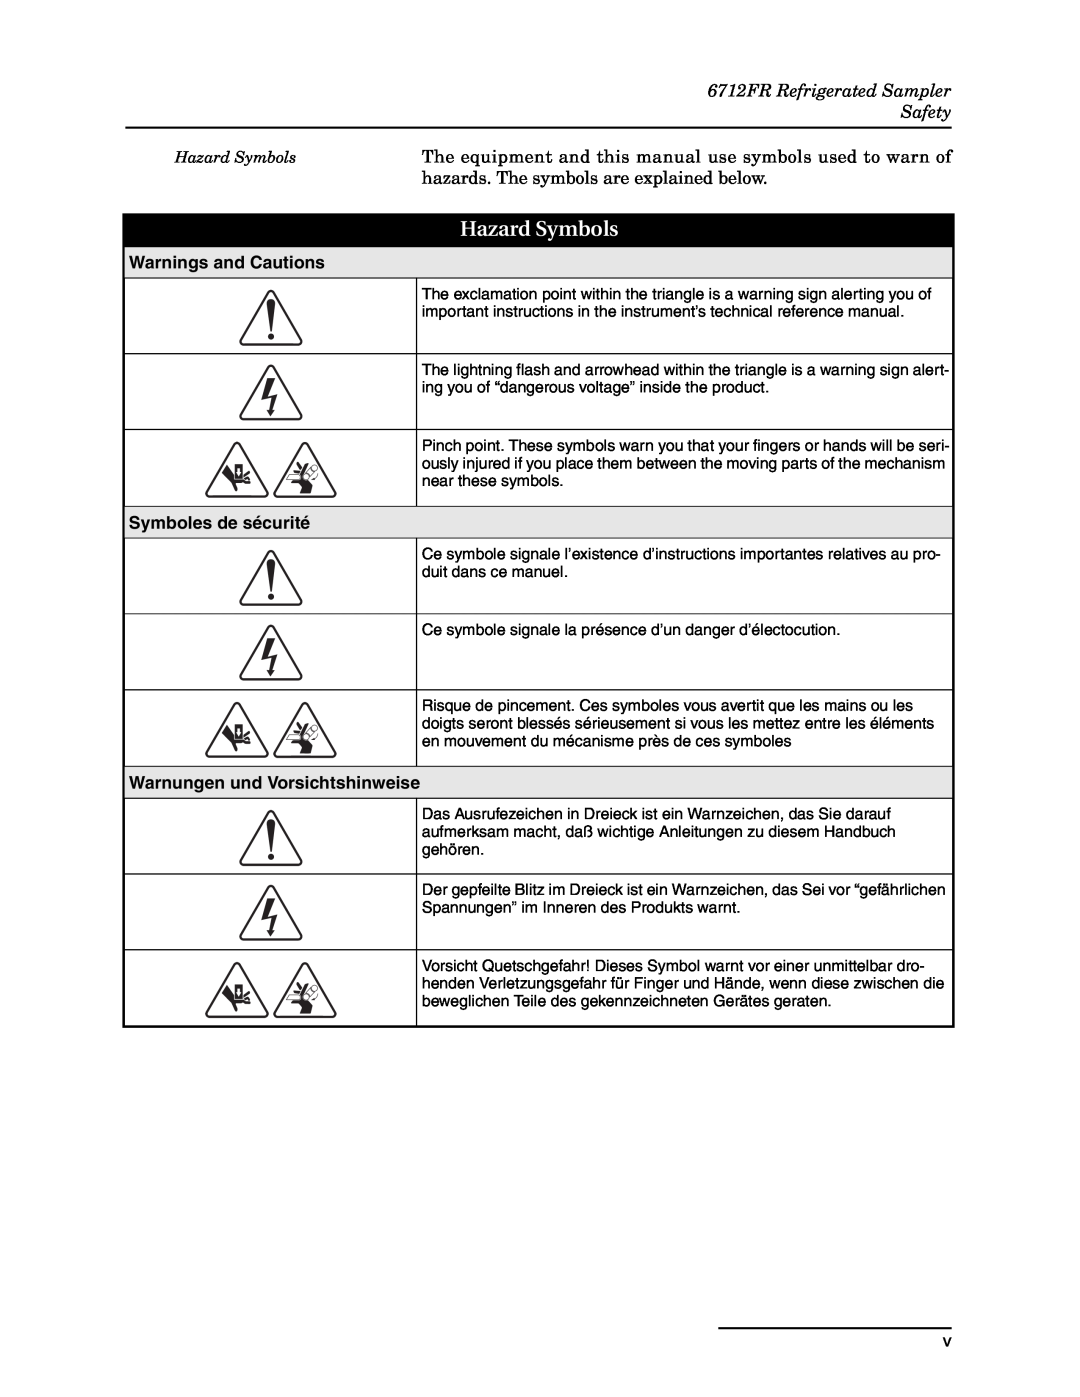 Teledyne Hazard Symbols, 6712FR Refrigerated Sampler, Safety, The equipment and this manual use symbols used to warn of 